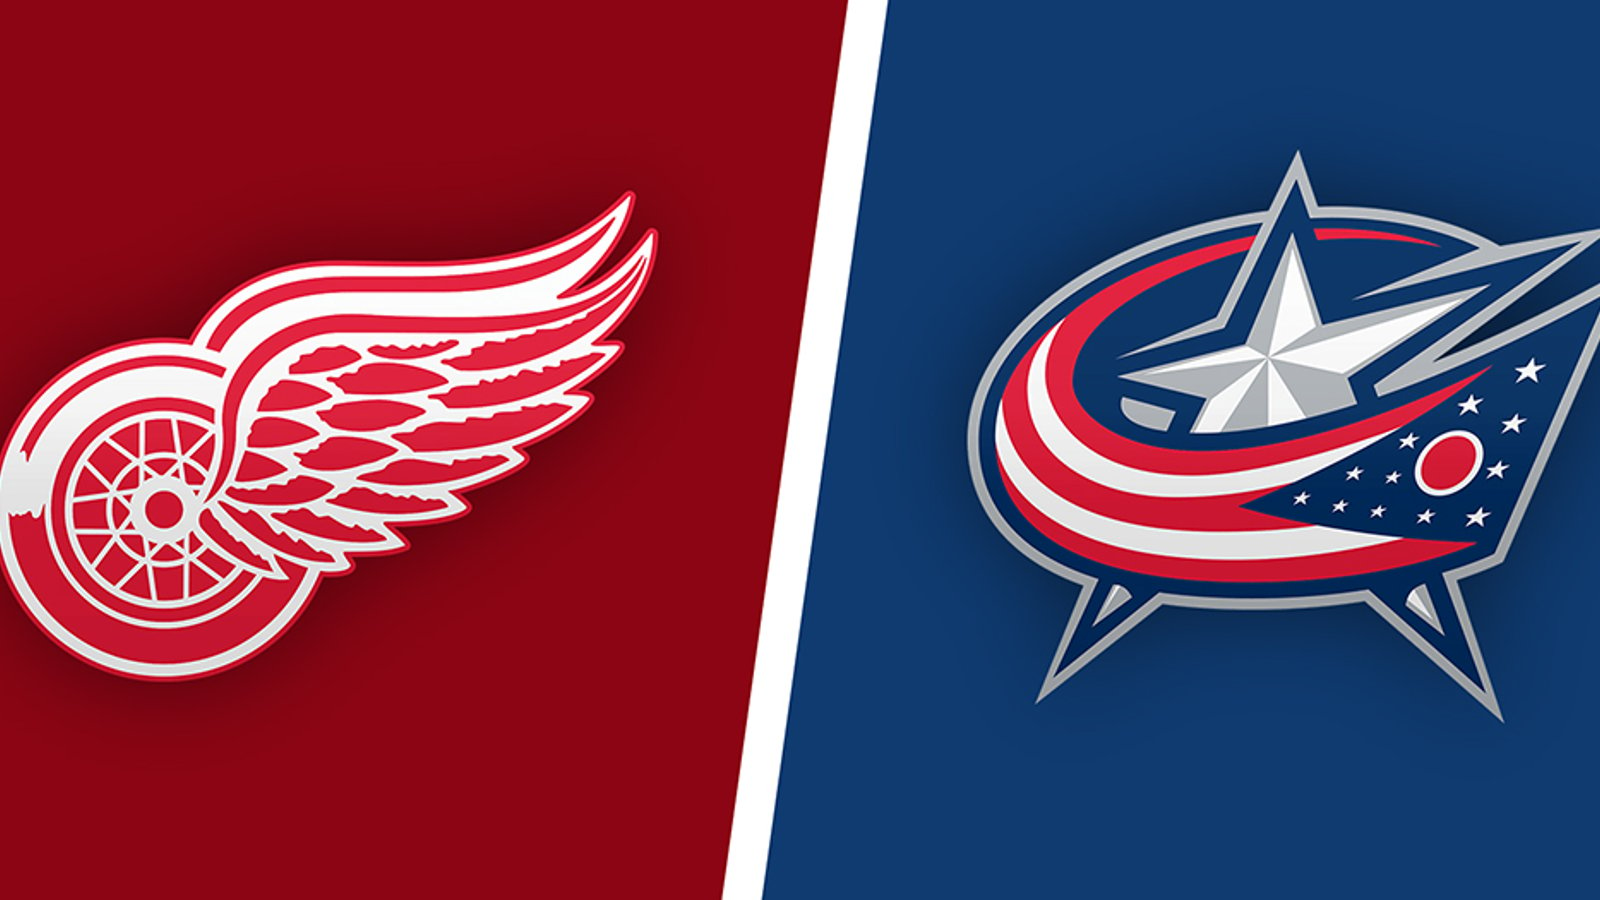 Red Wings release lineup for exhibition matchup vs. Blue Jackets 